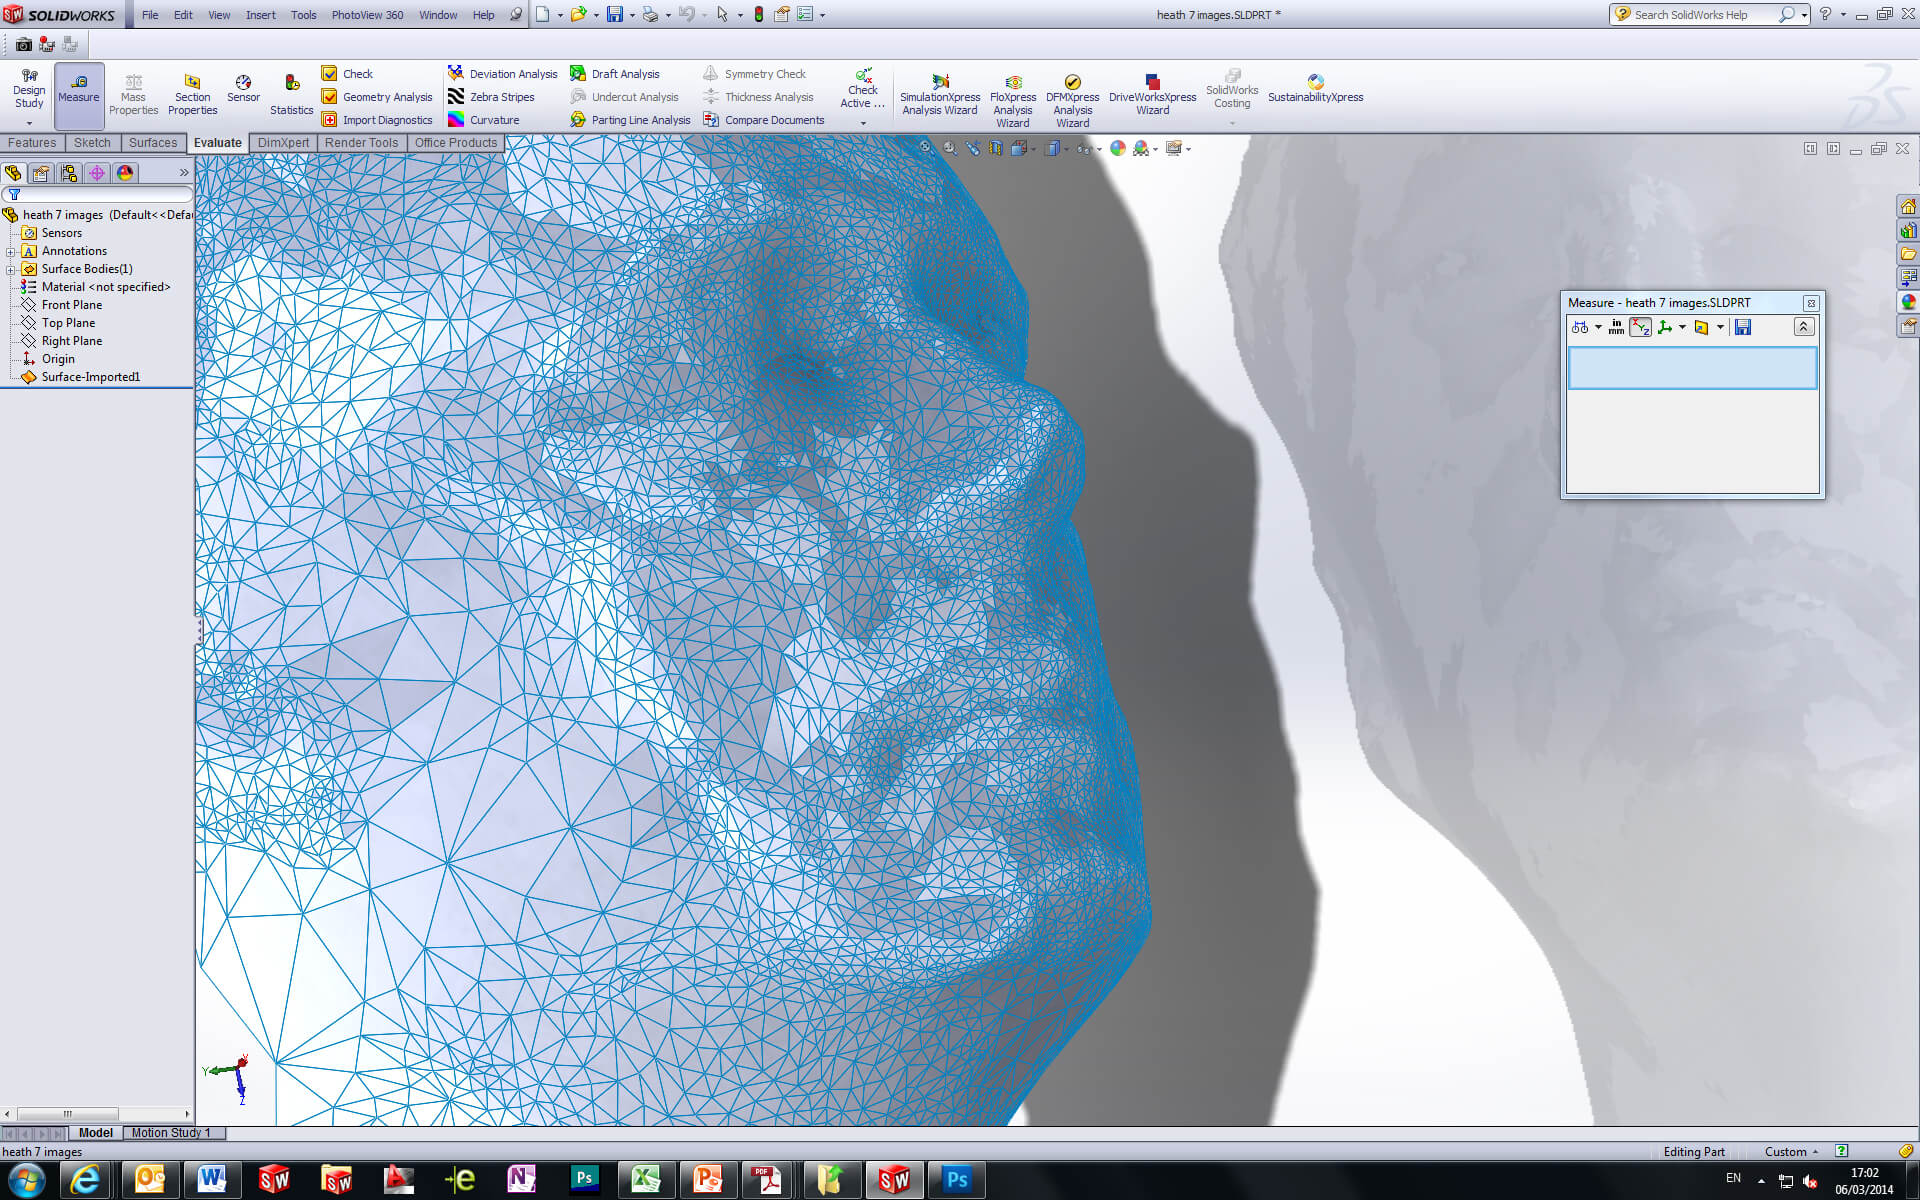 Screenshot of 3D scan data of a participant's face